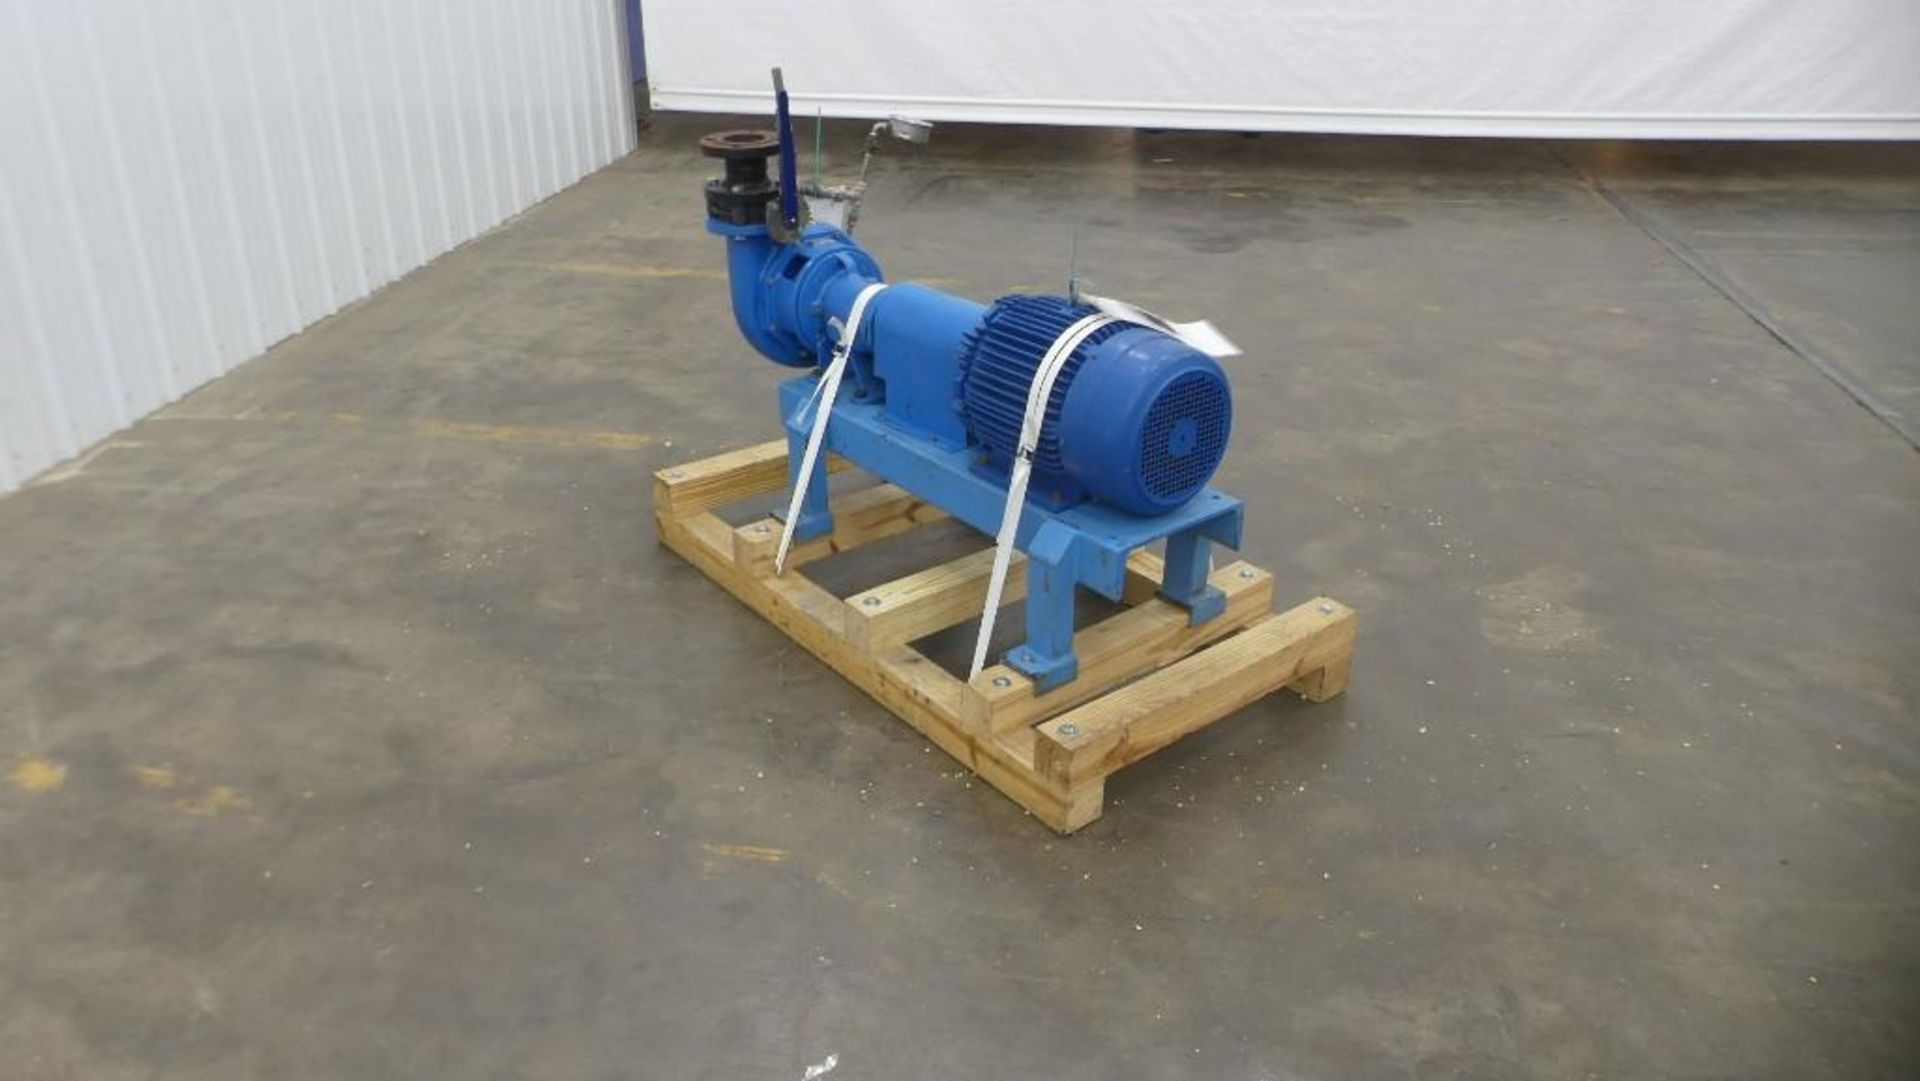 Goulds Centrifugal Pump with 15 HP Motor - Image 18 of 18